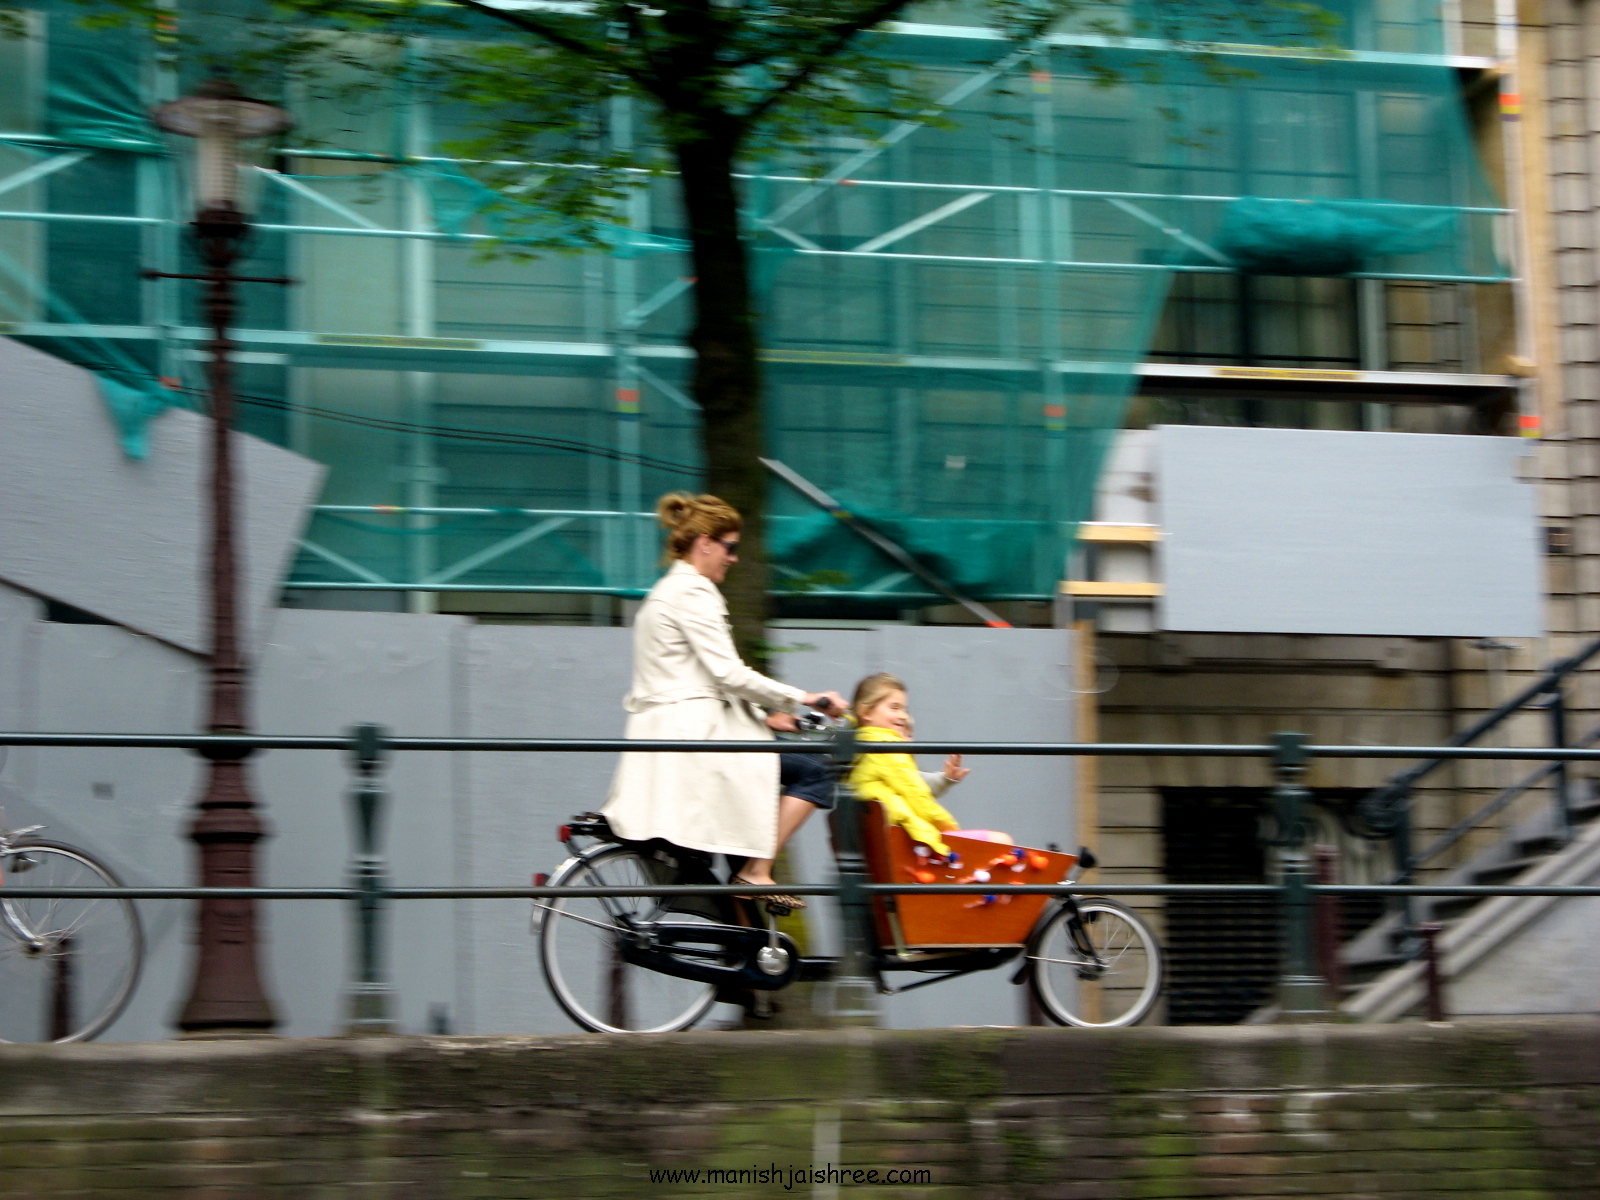 Bicycle ride, Amsterdam